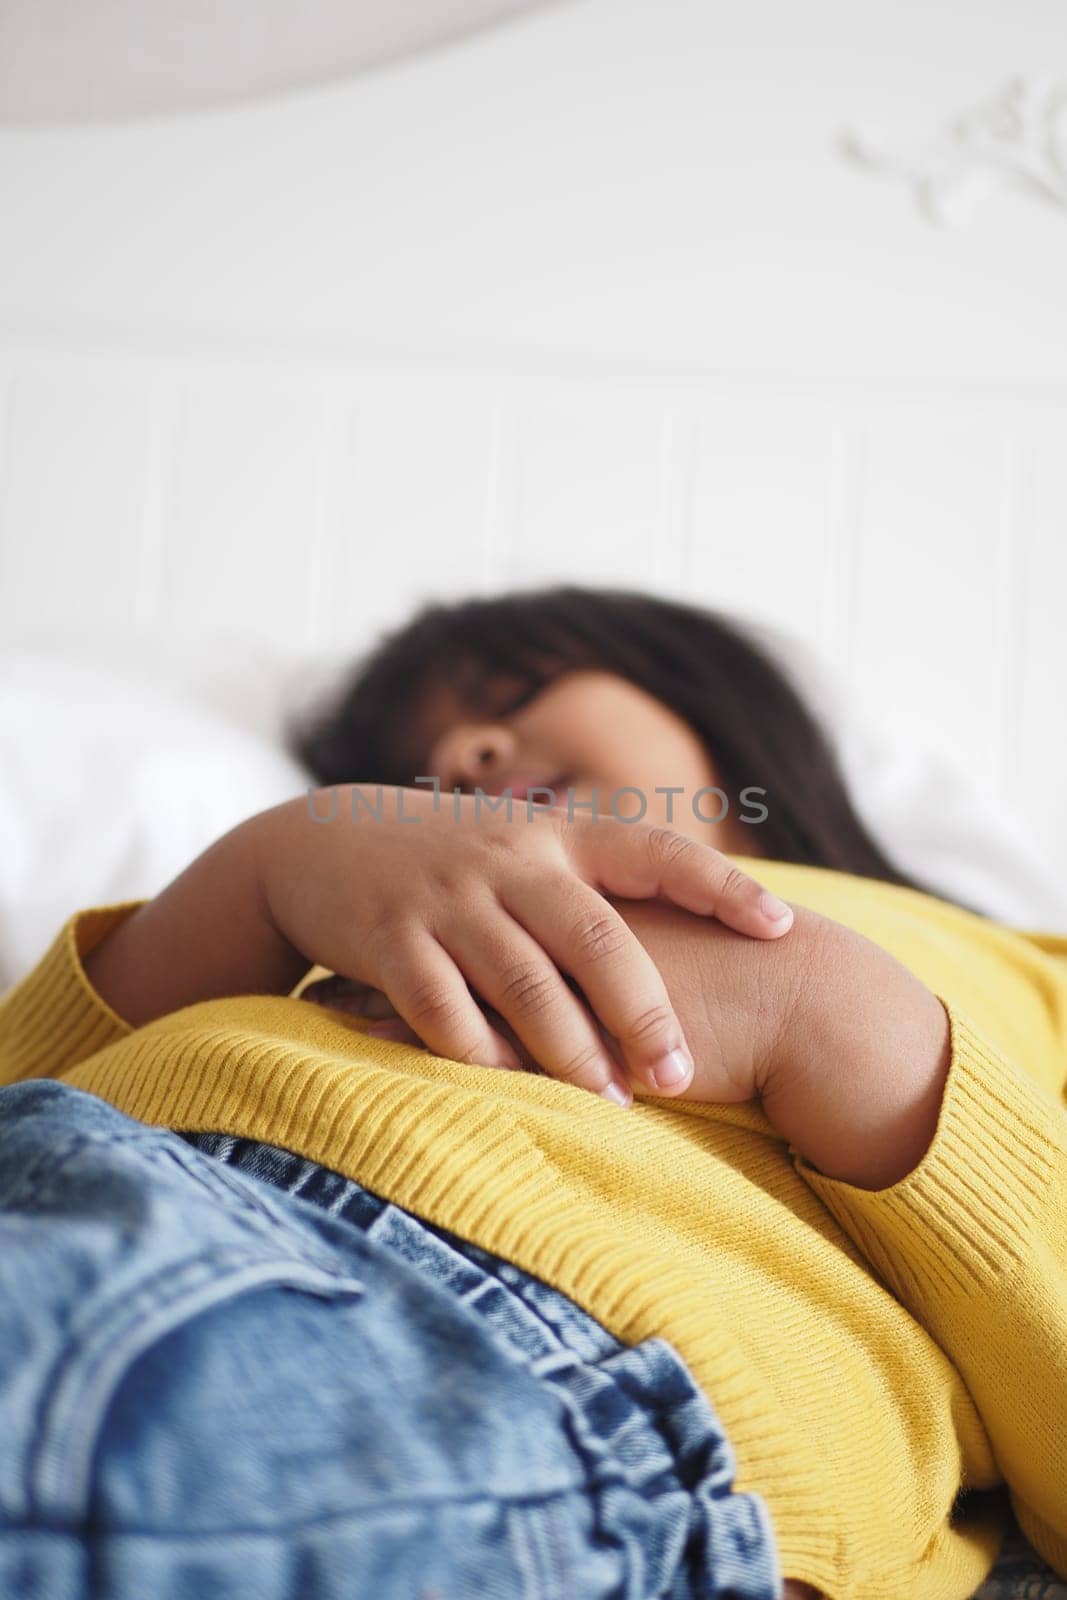 a child sleeping in bed, selective focus